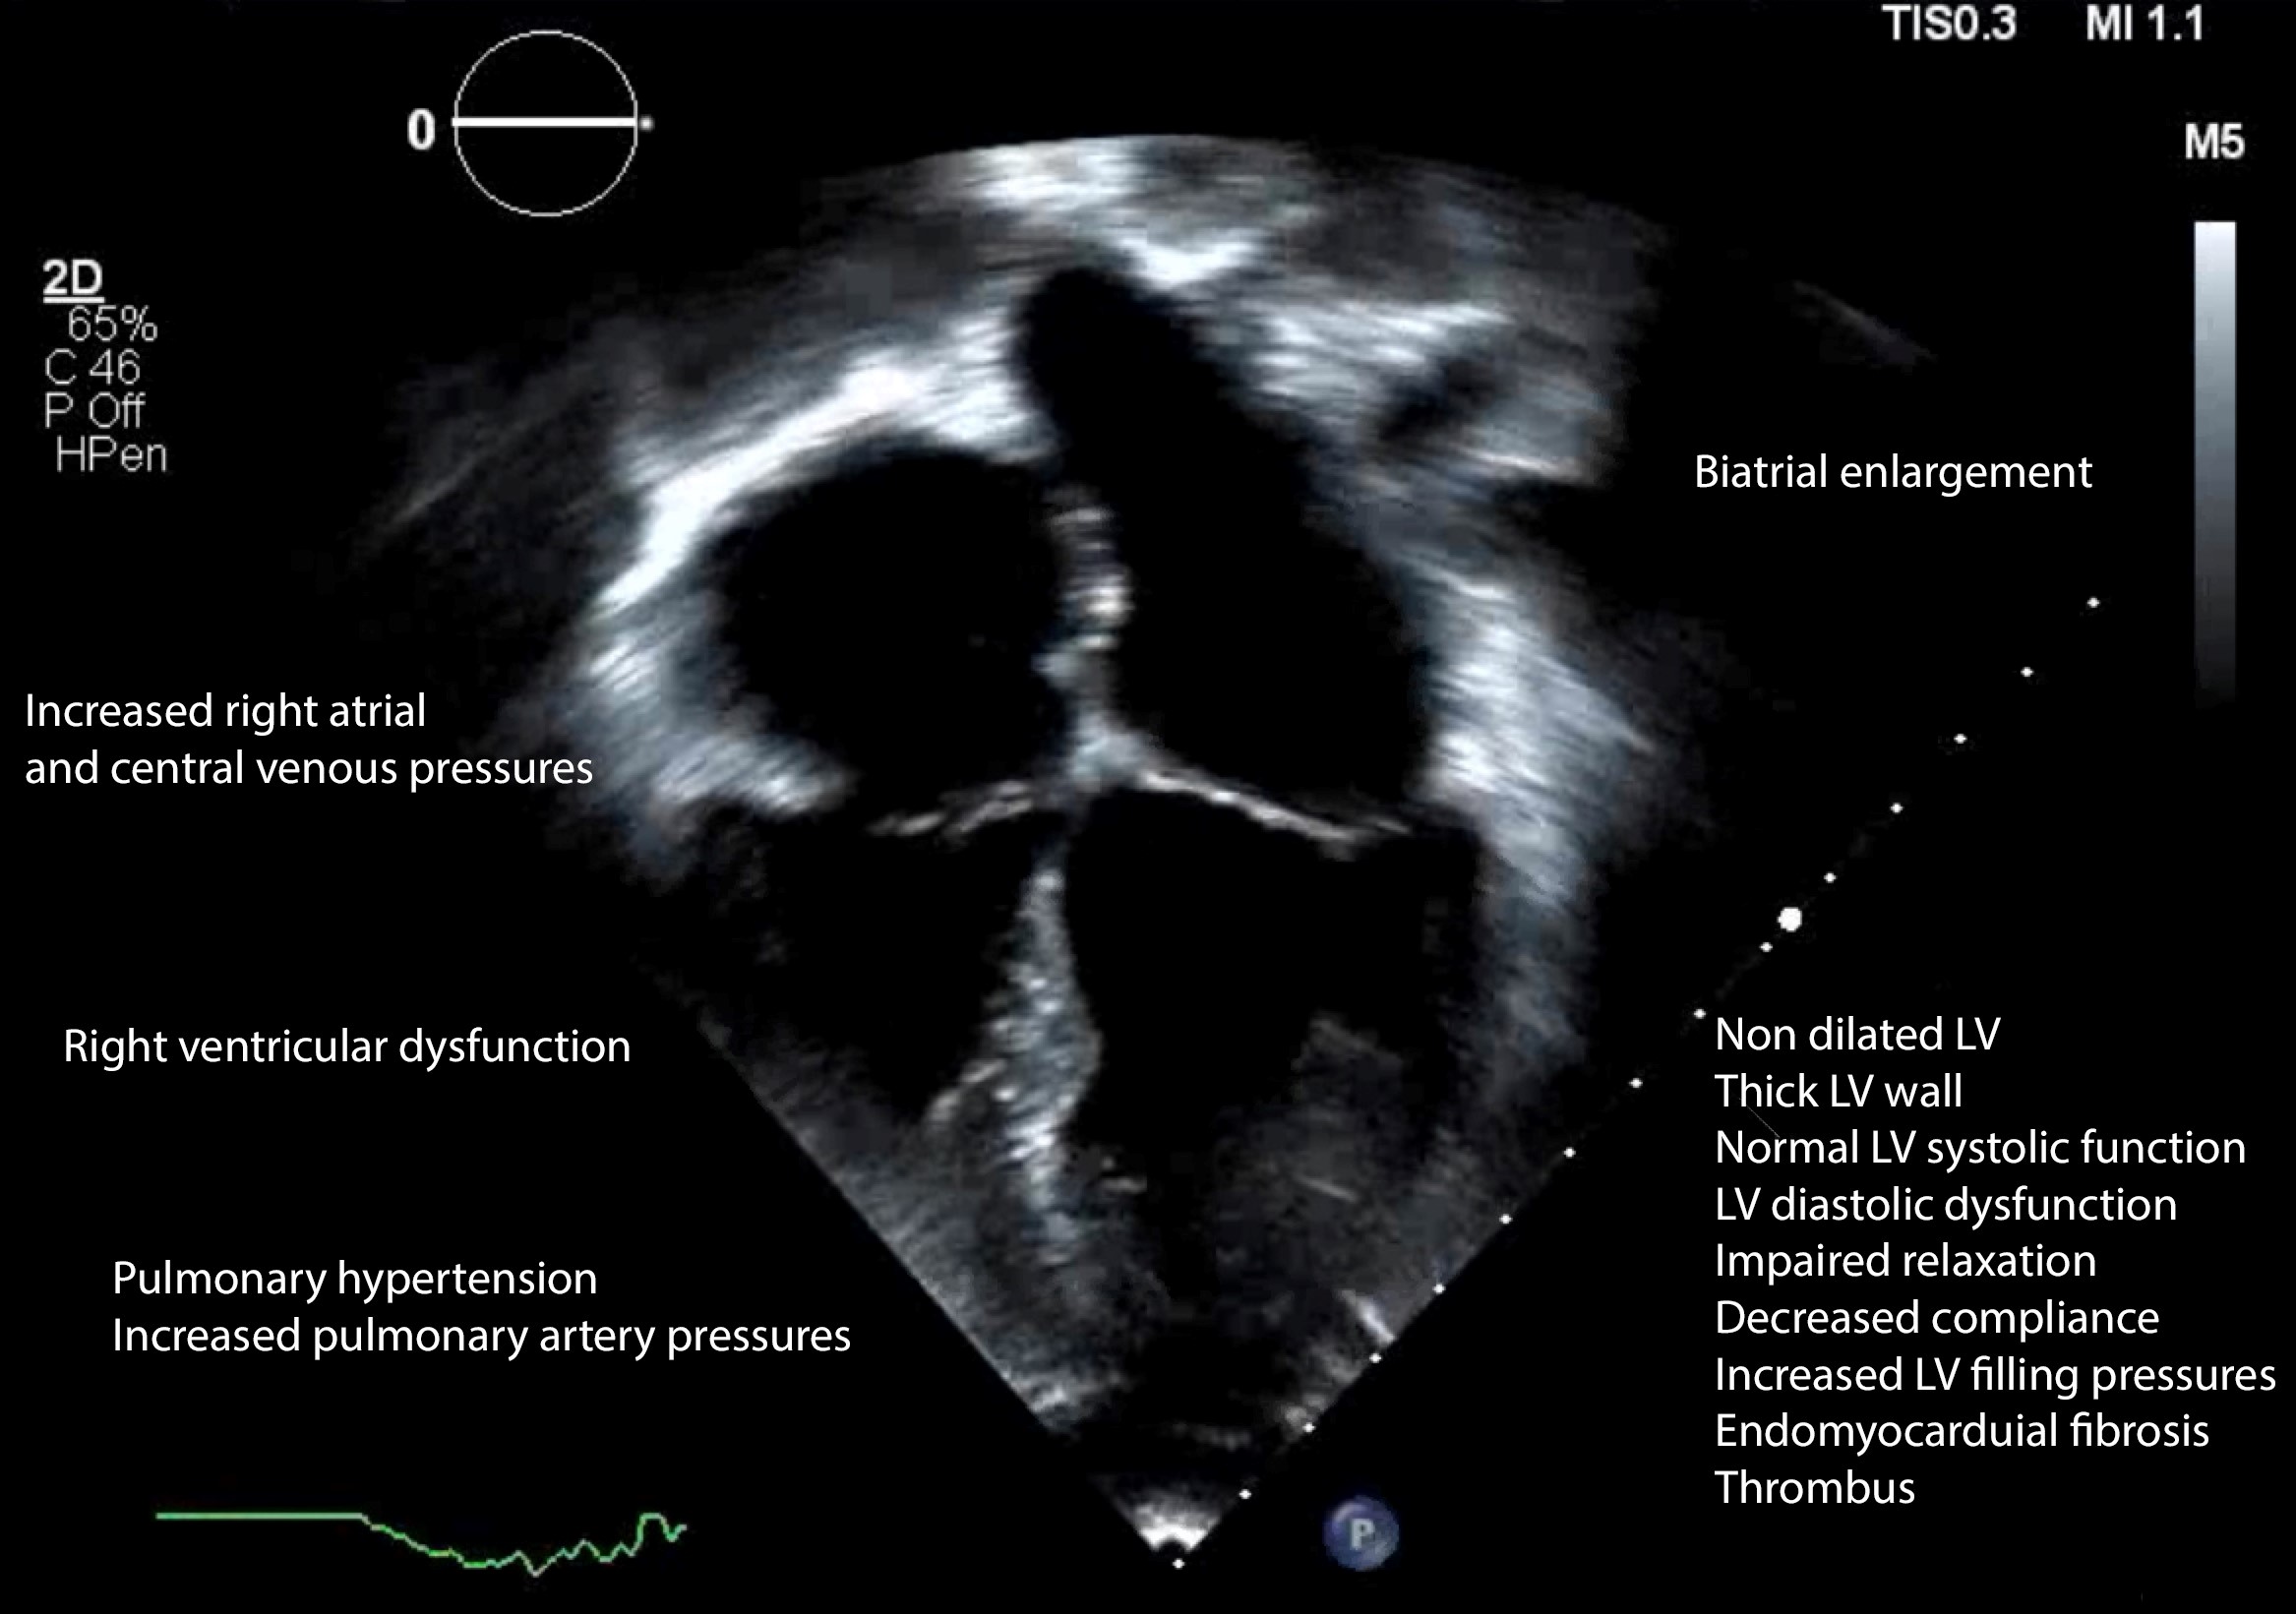 Figure 3. Echocardiographic features of restrictive cardiomyopathy